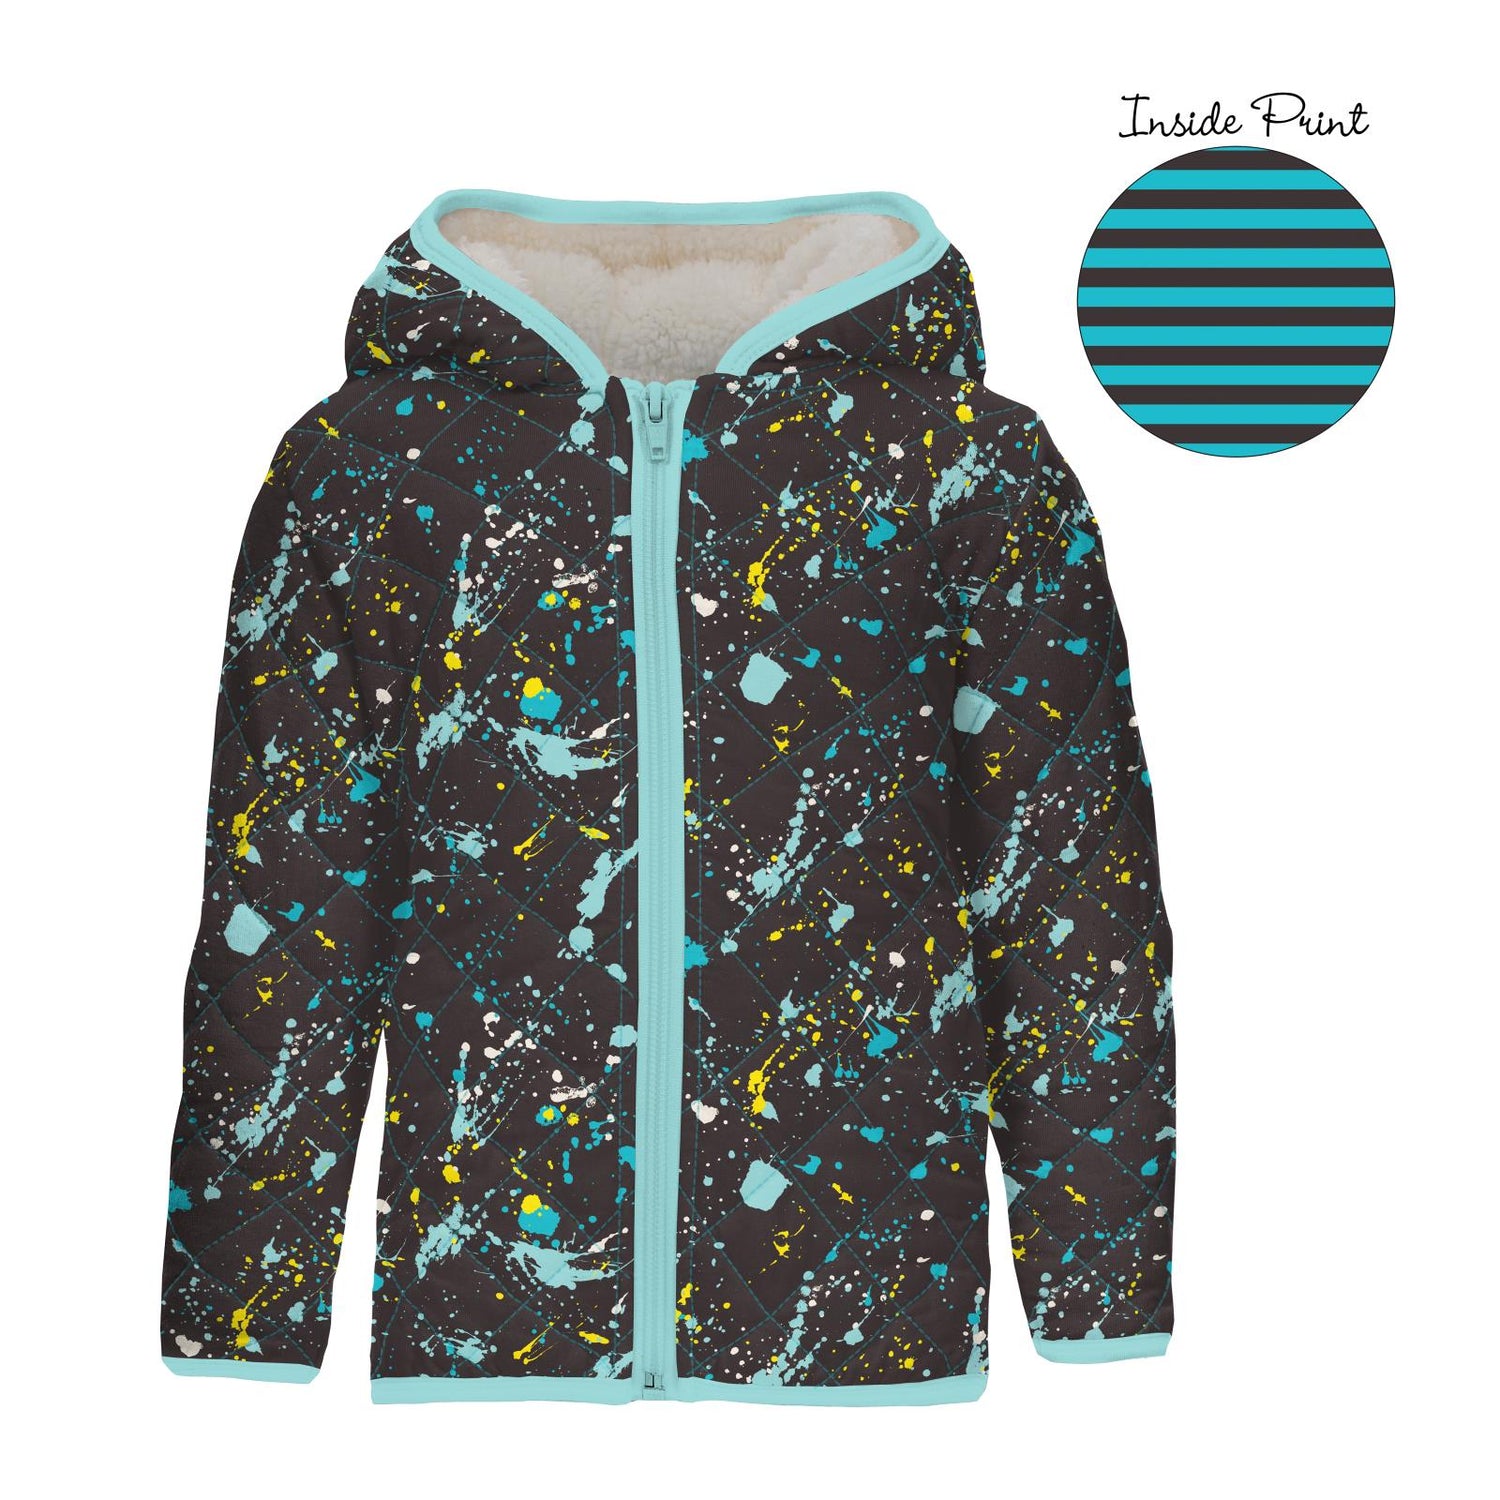 Print Quilted Jacket with Sherpa-Lined Hood in Confetti Splatter Paint/Rad Stripe